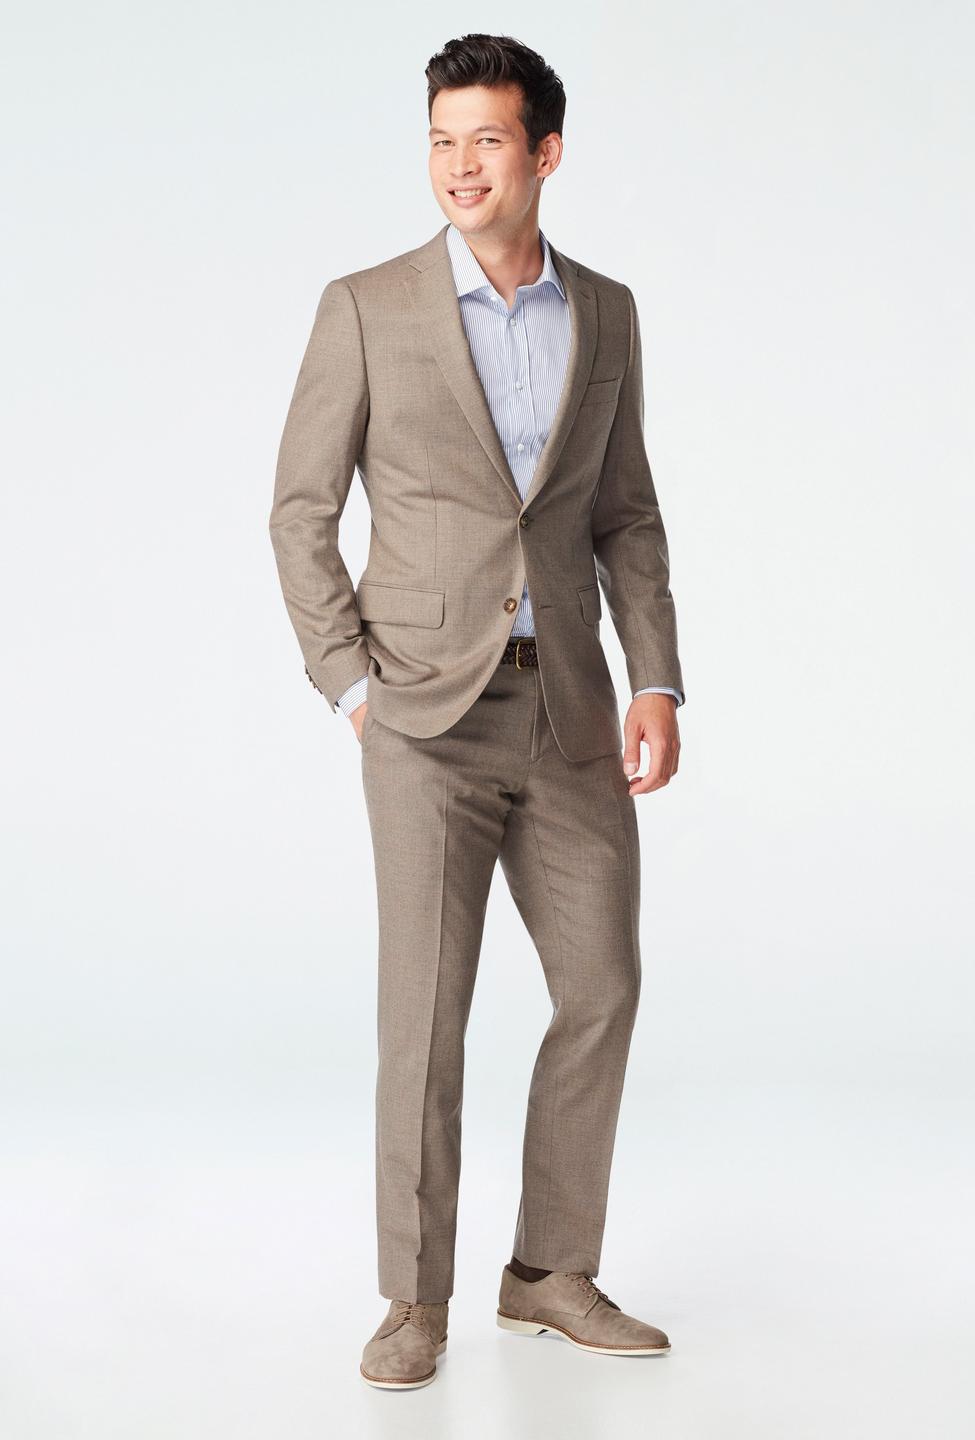 Brown suit - Hayward Solid Design from Luxury Indochino Collection